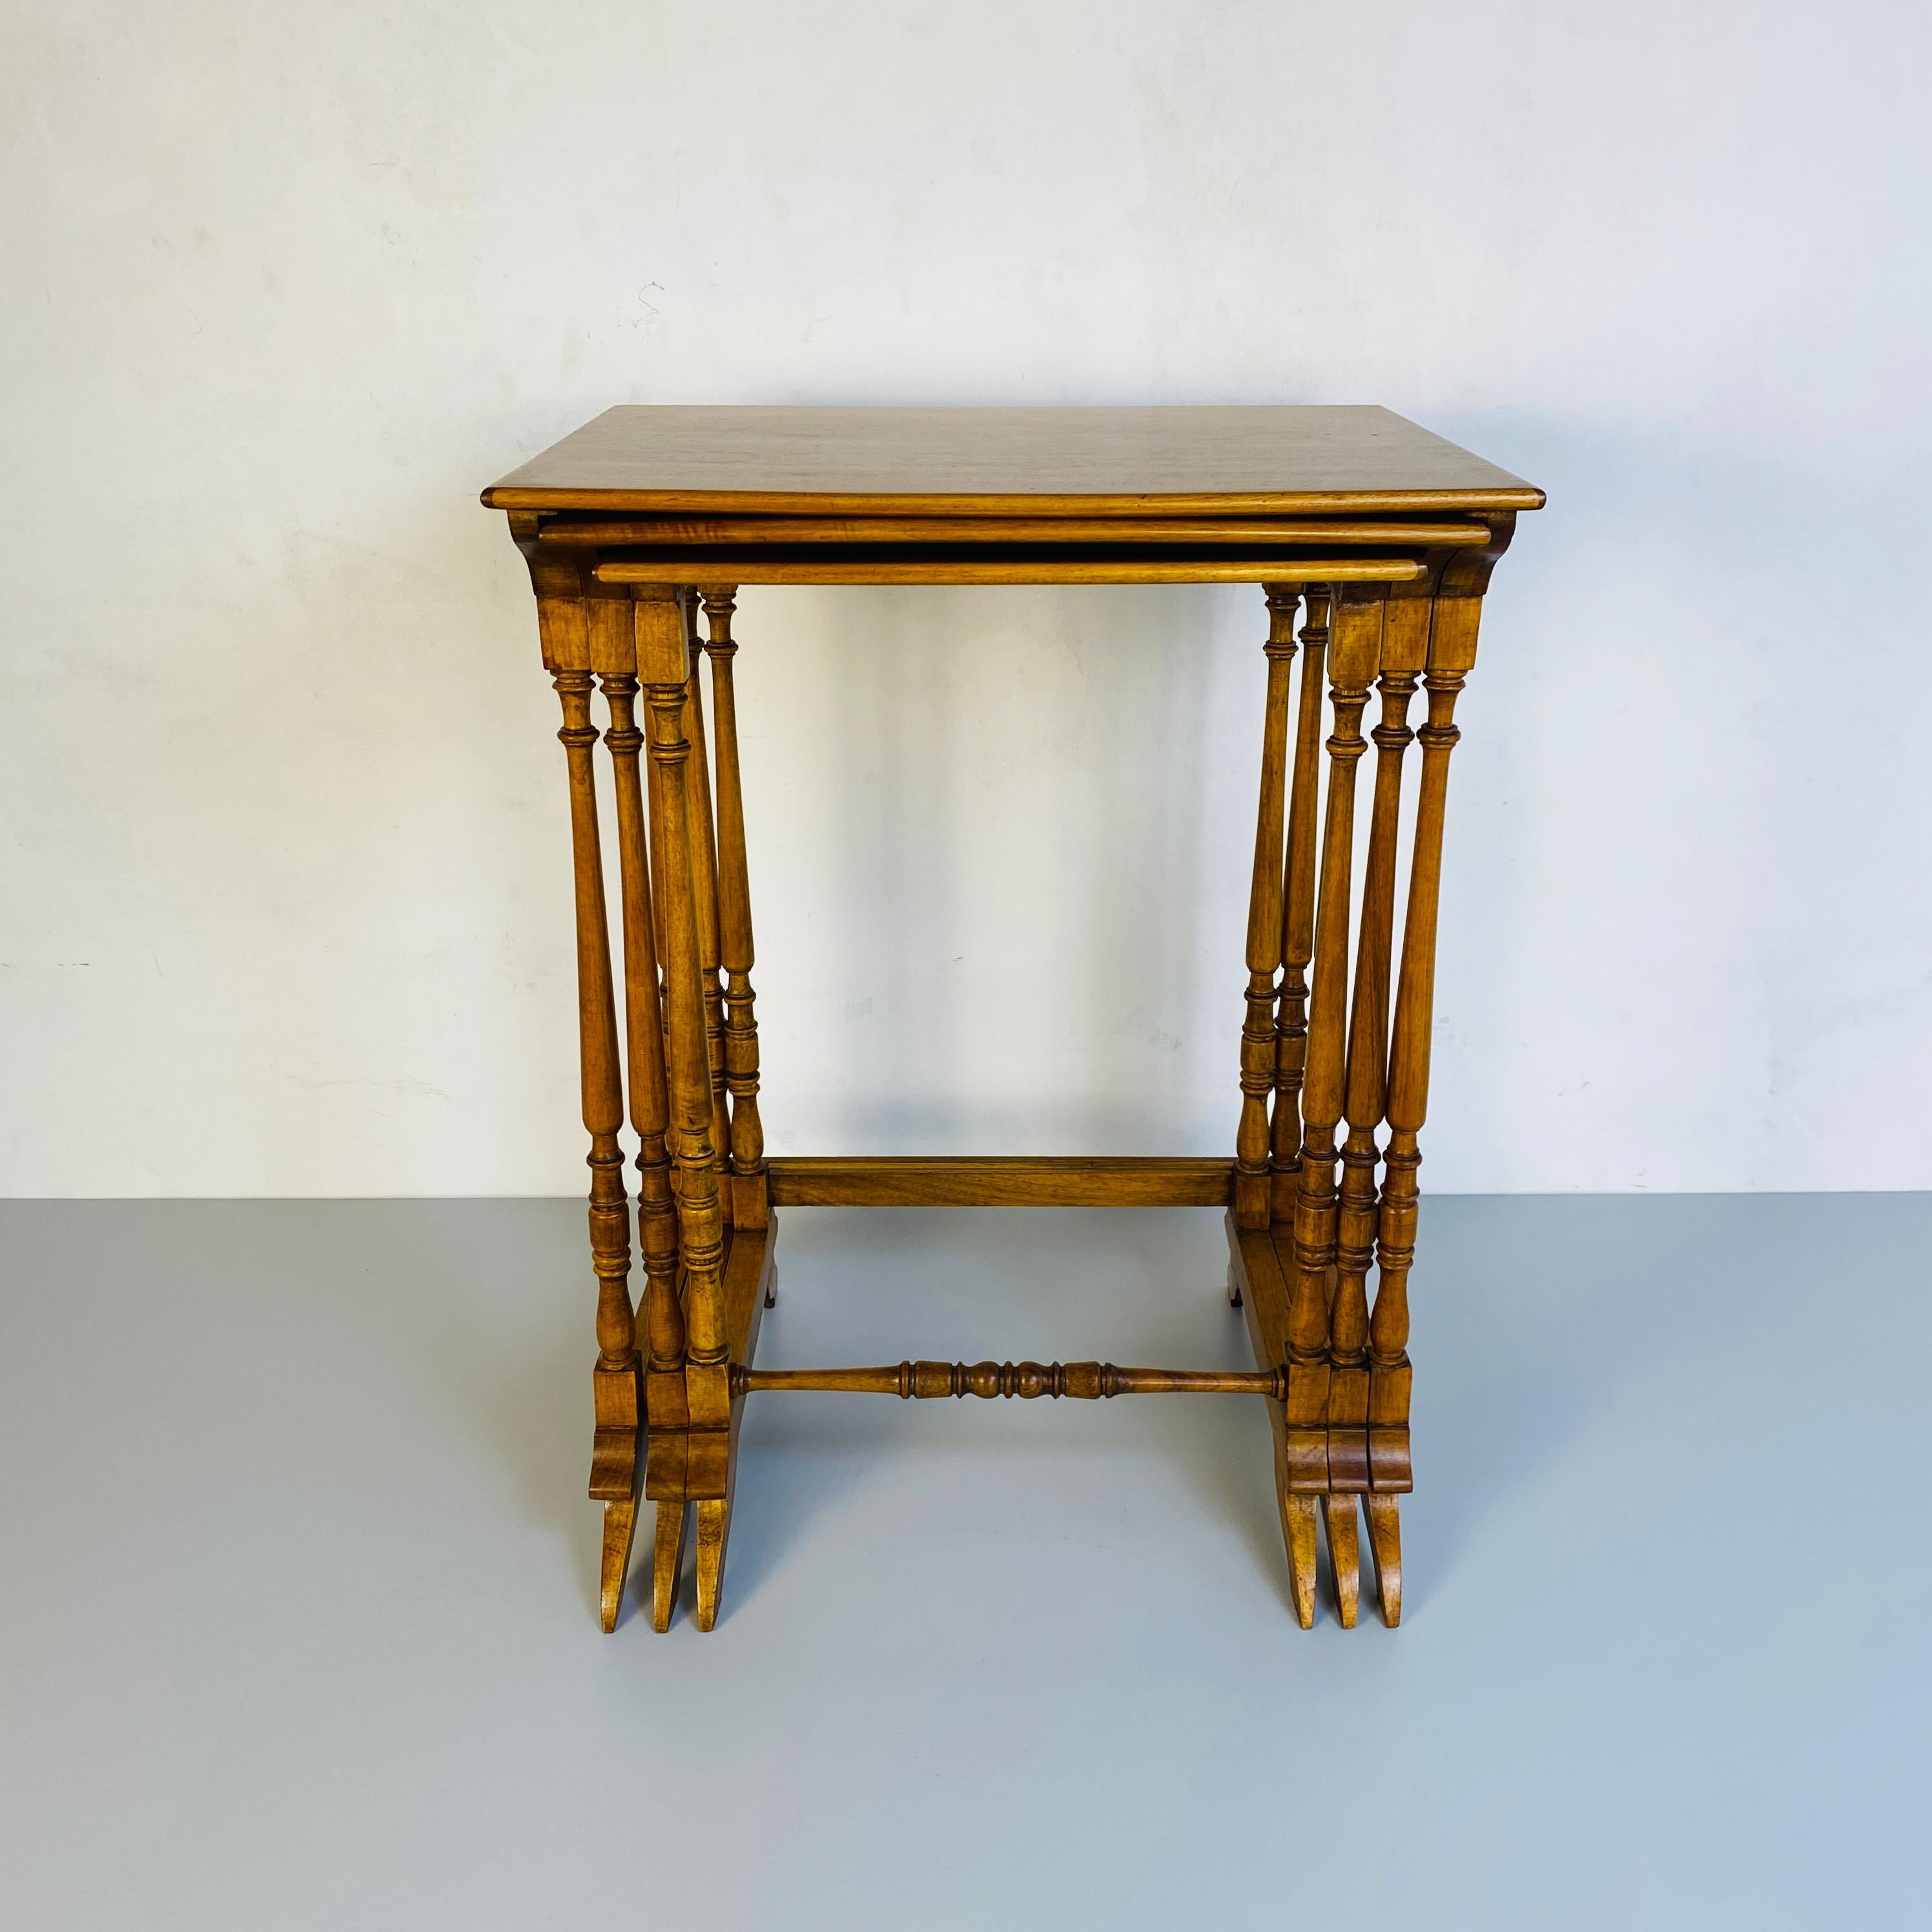 Other Italian Set of Three Rectangular Light Wood Tables with Shapely Legs, 1900s